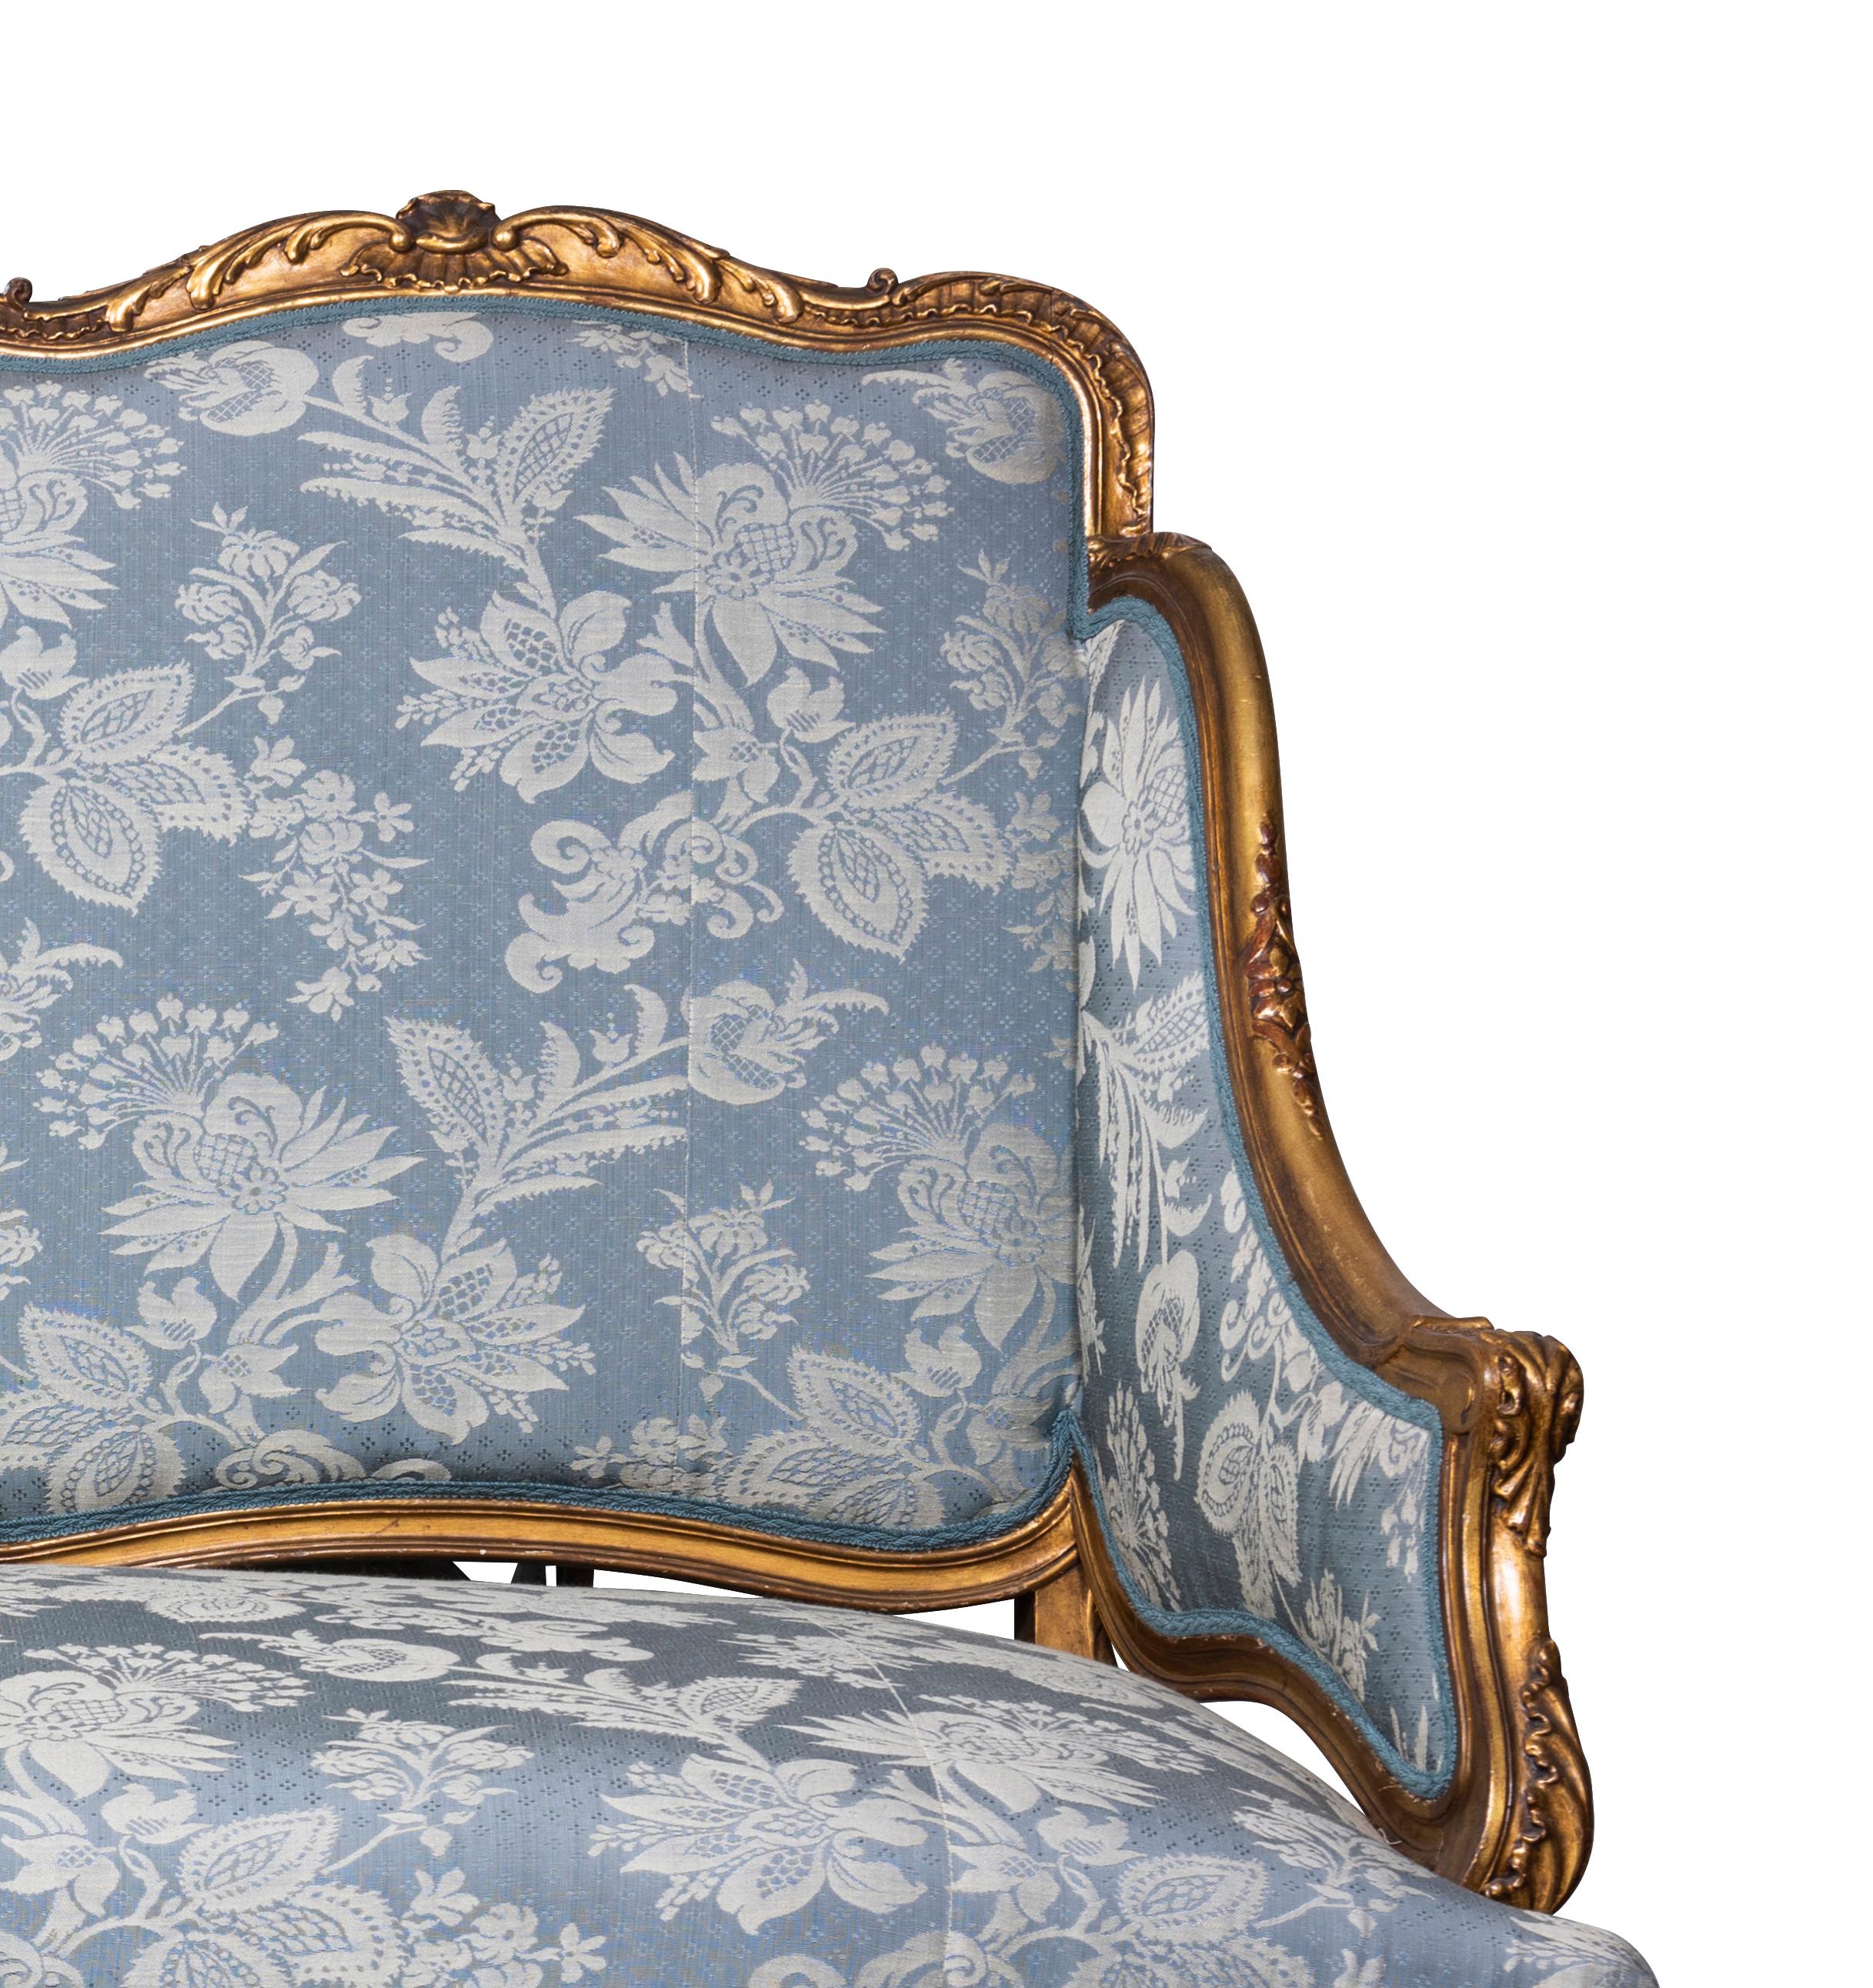 The exposed giltwood frame richly decorated with rocaille palms and foliated reliefs, the cartouche back, seat and articulated arms upholstered in monochromatic northern Italian floral silk, the whole supported on eight cabriole legs united by